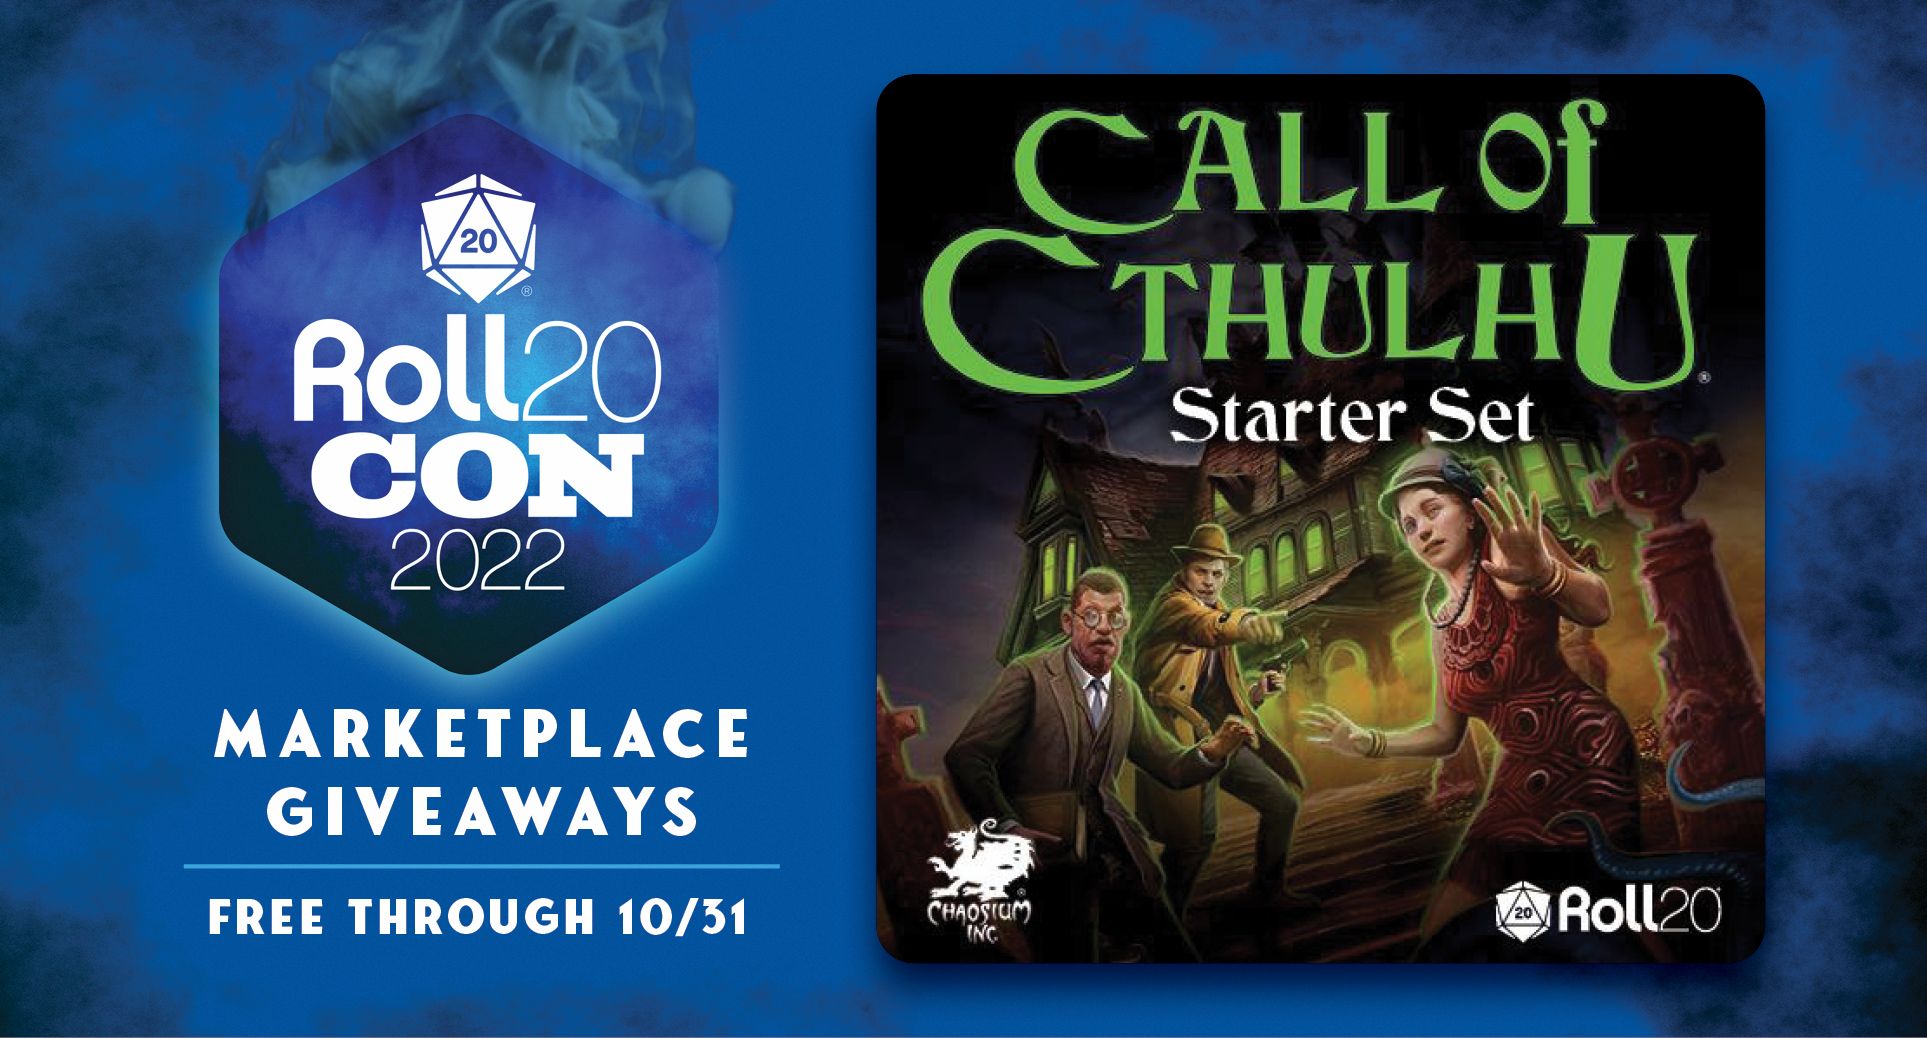 Call of Cthulhu Starter Set is free for Roll20 Con